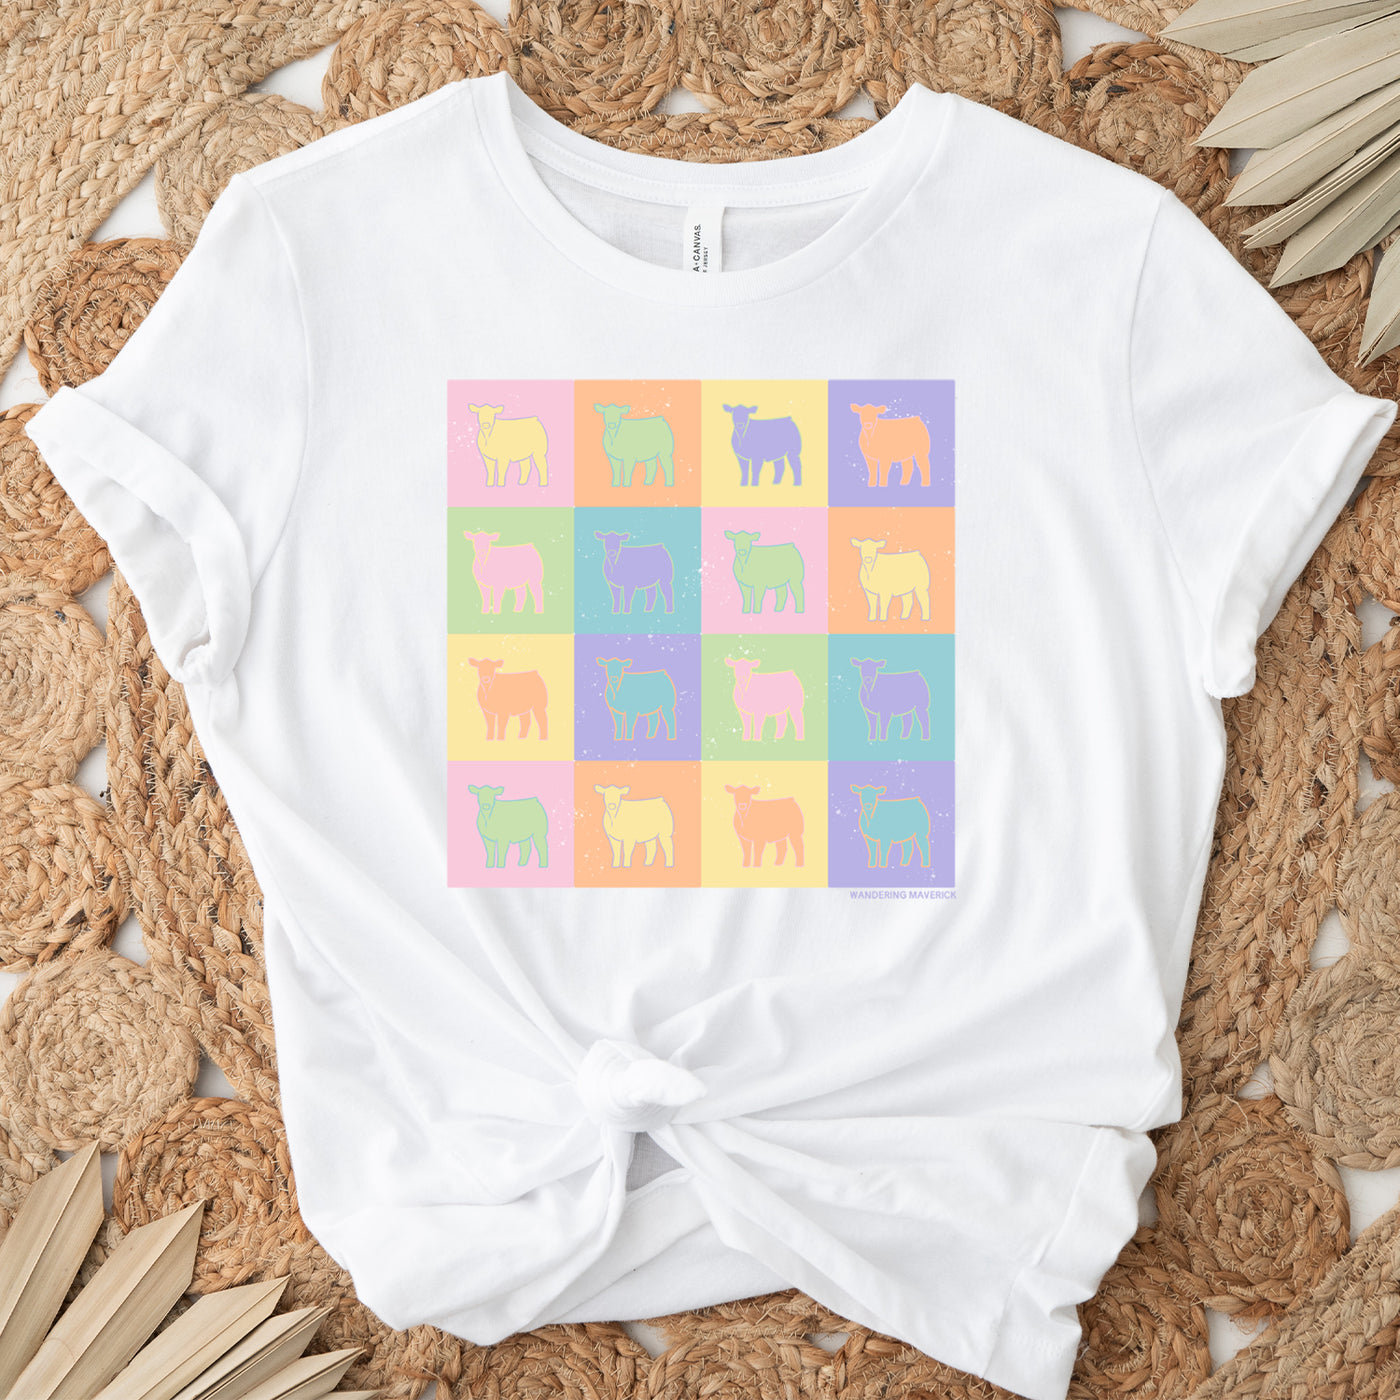 Pastel Checkered Steer T-Shirt (XS-4XL) - Multiple Colors!